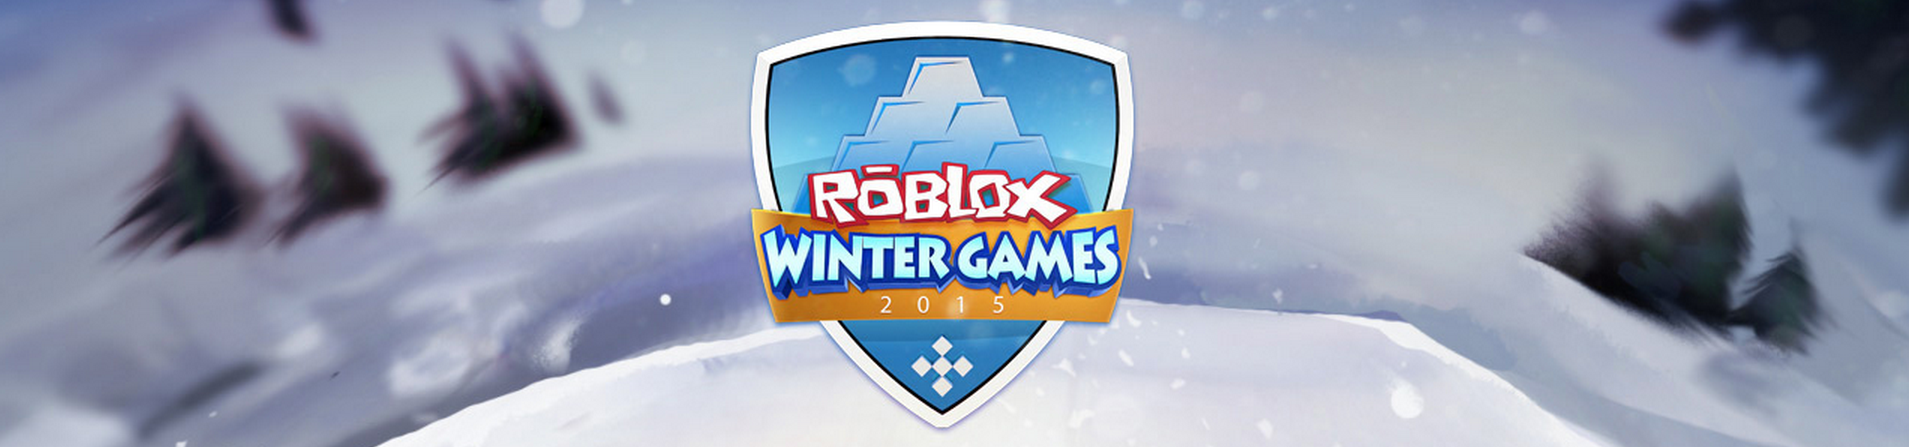 Let It Snow With Roblox S Winter Games 2015 Roblox Blog